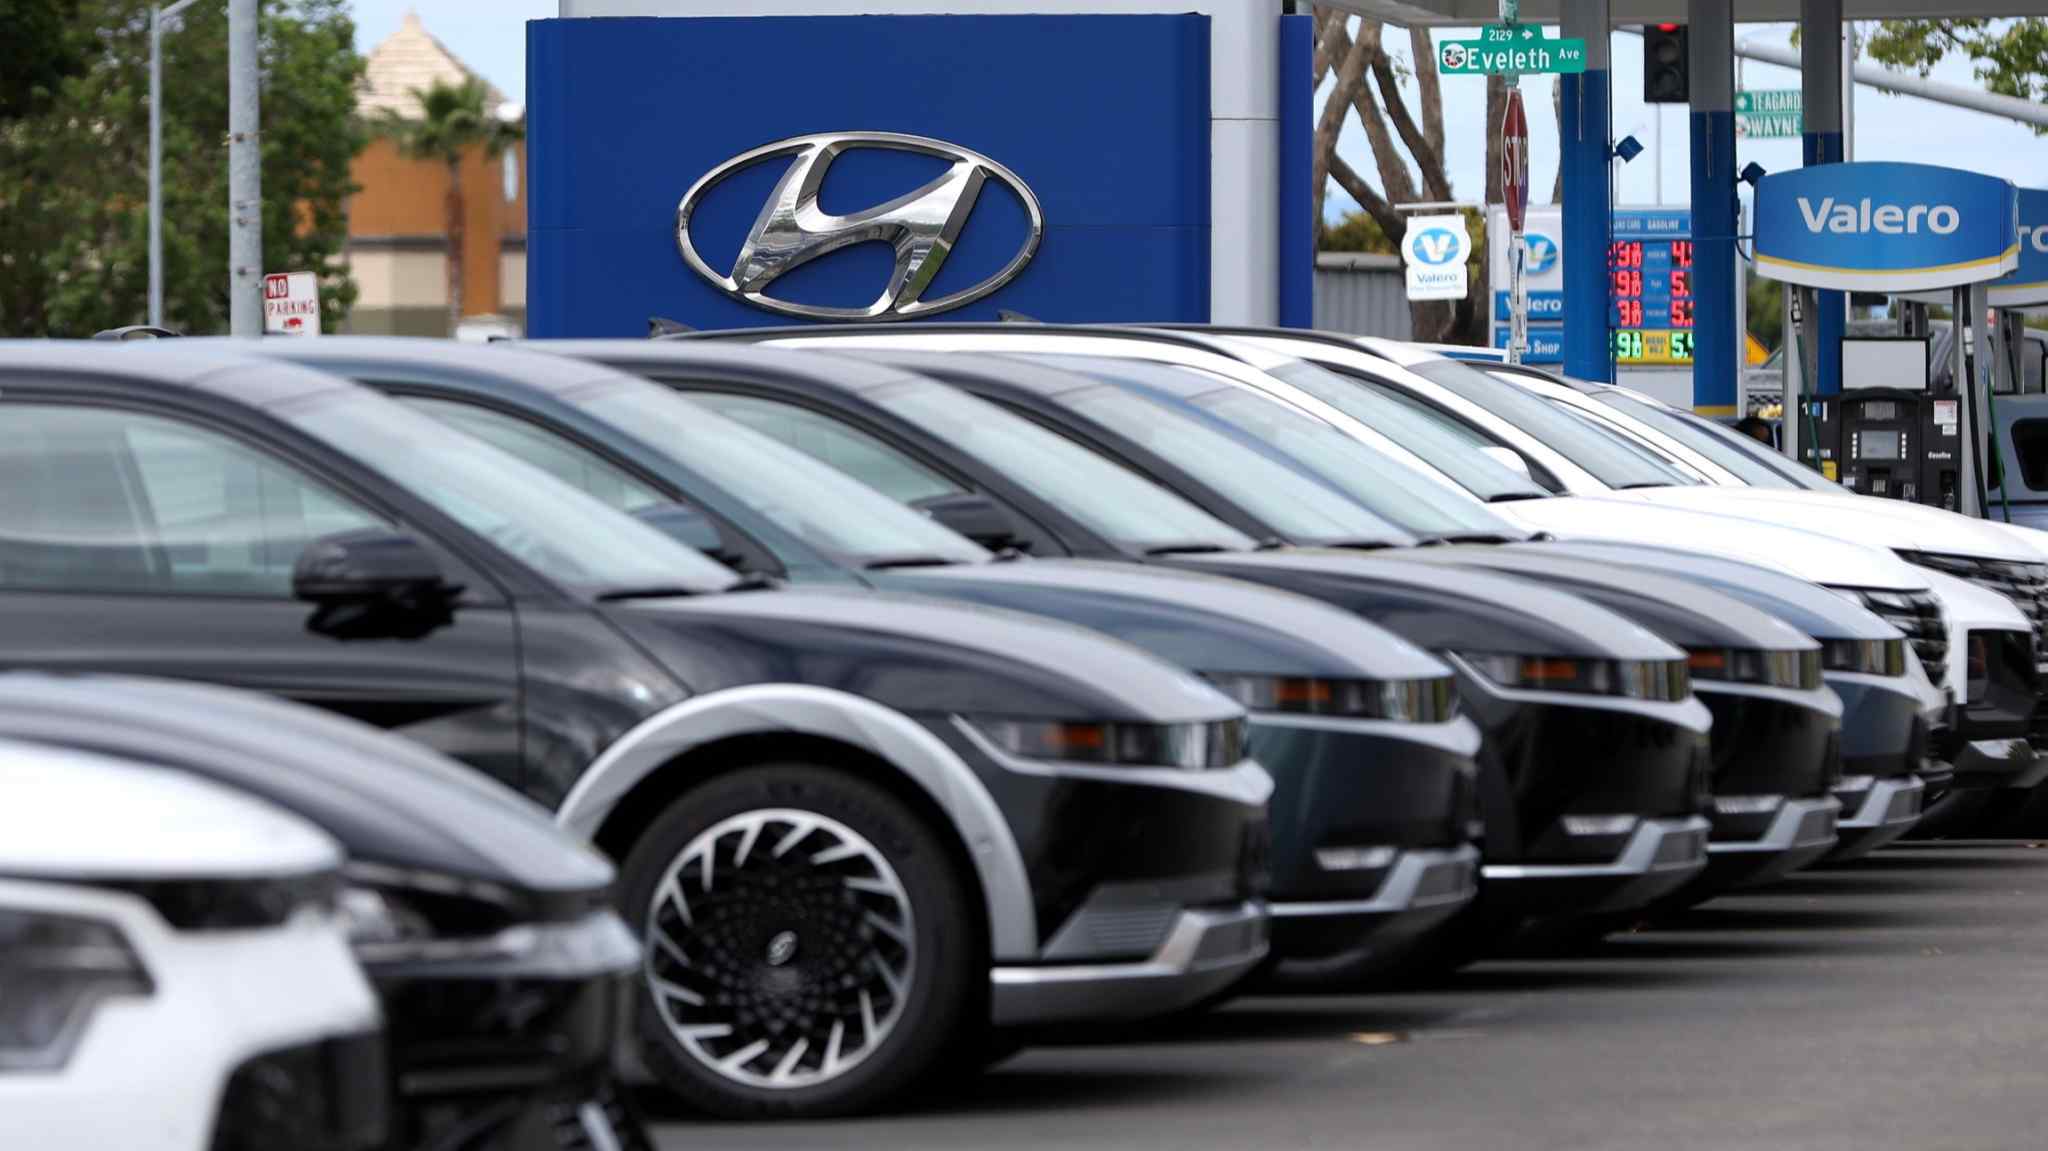 New York sues Hyundai and Kia over ‘explosion’ of car thefts